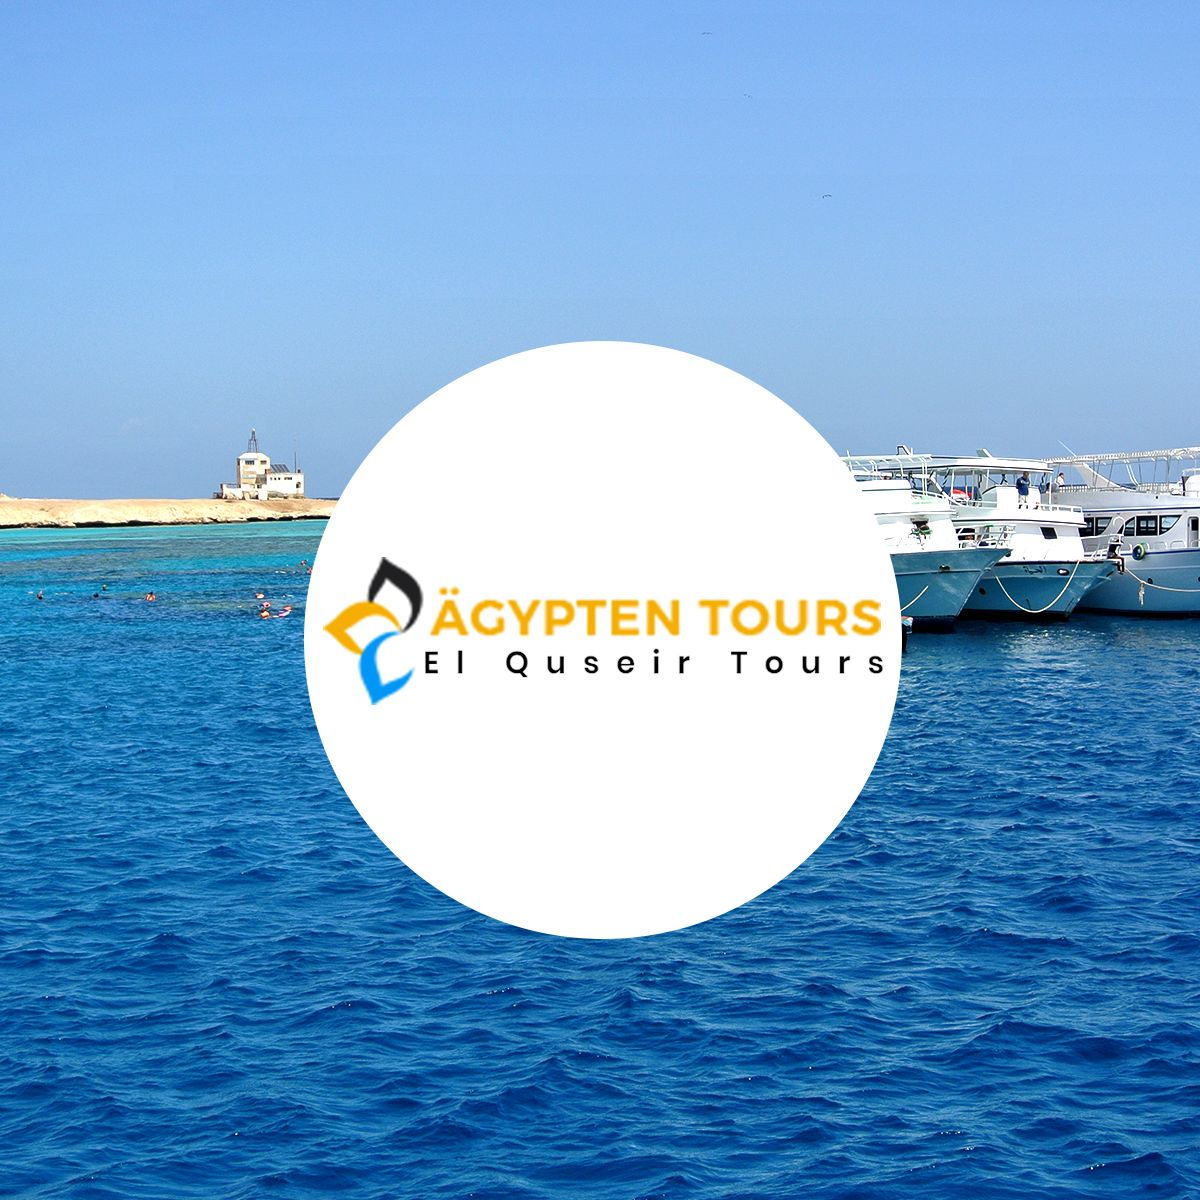 About El Quseir Tours